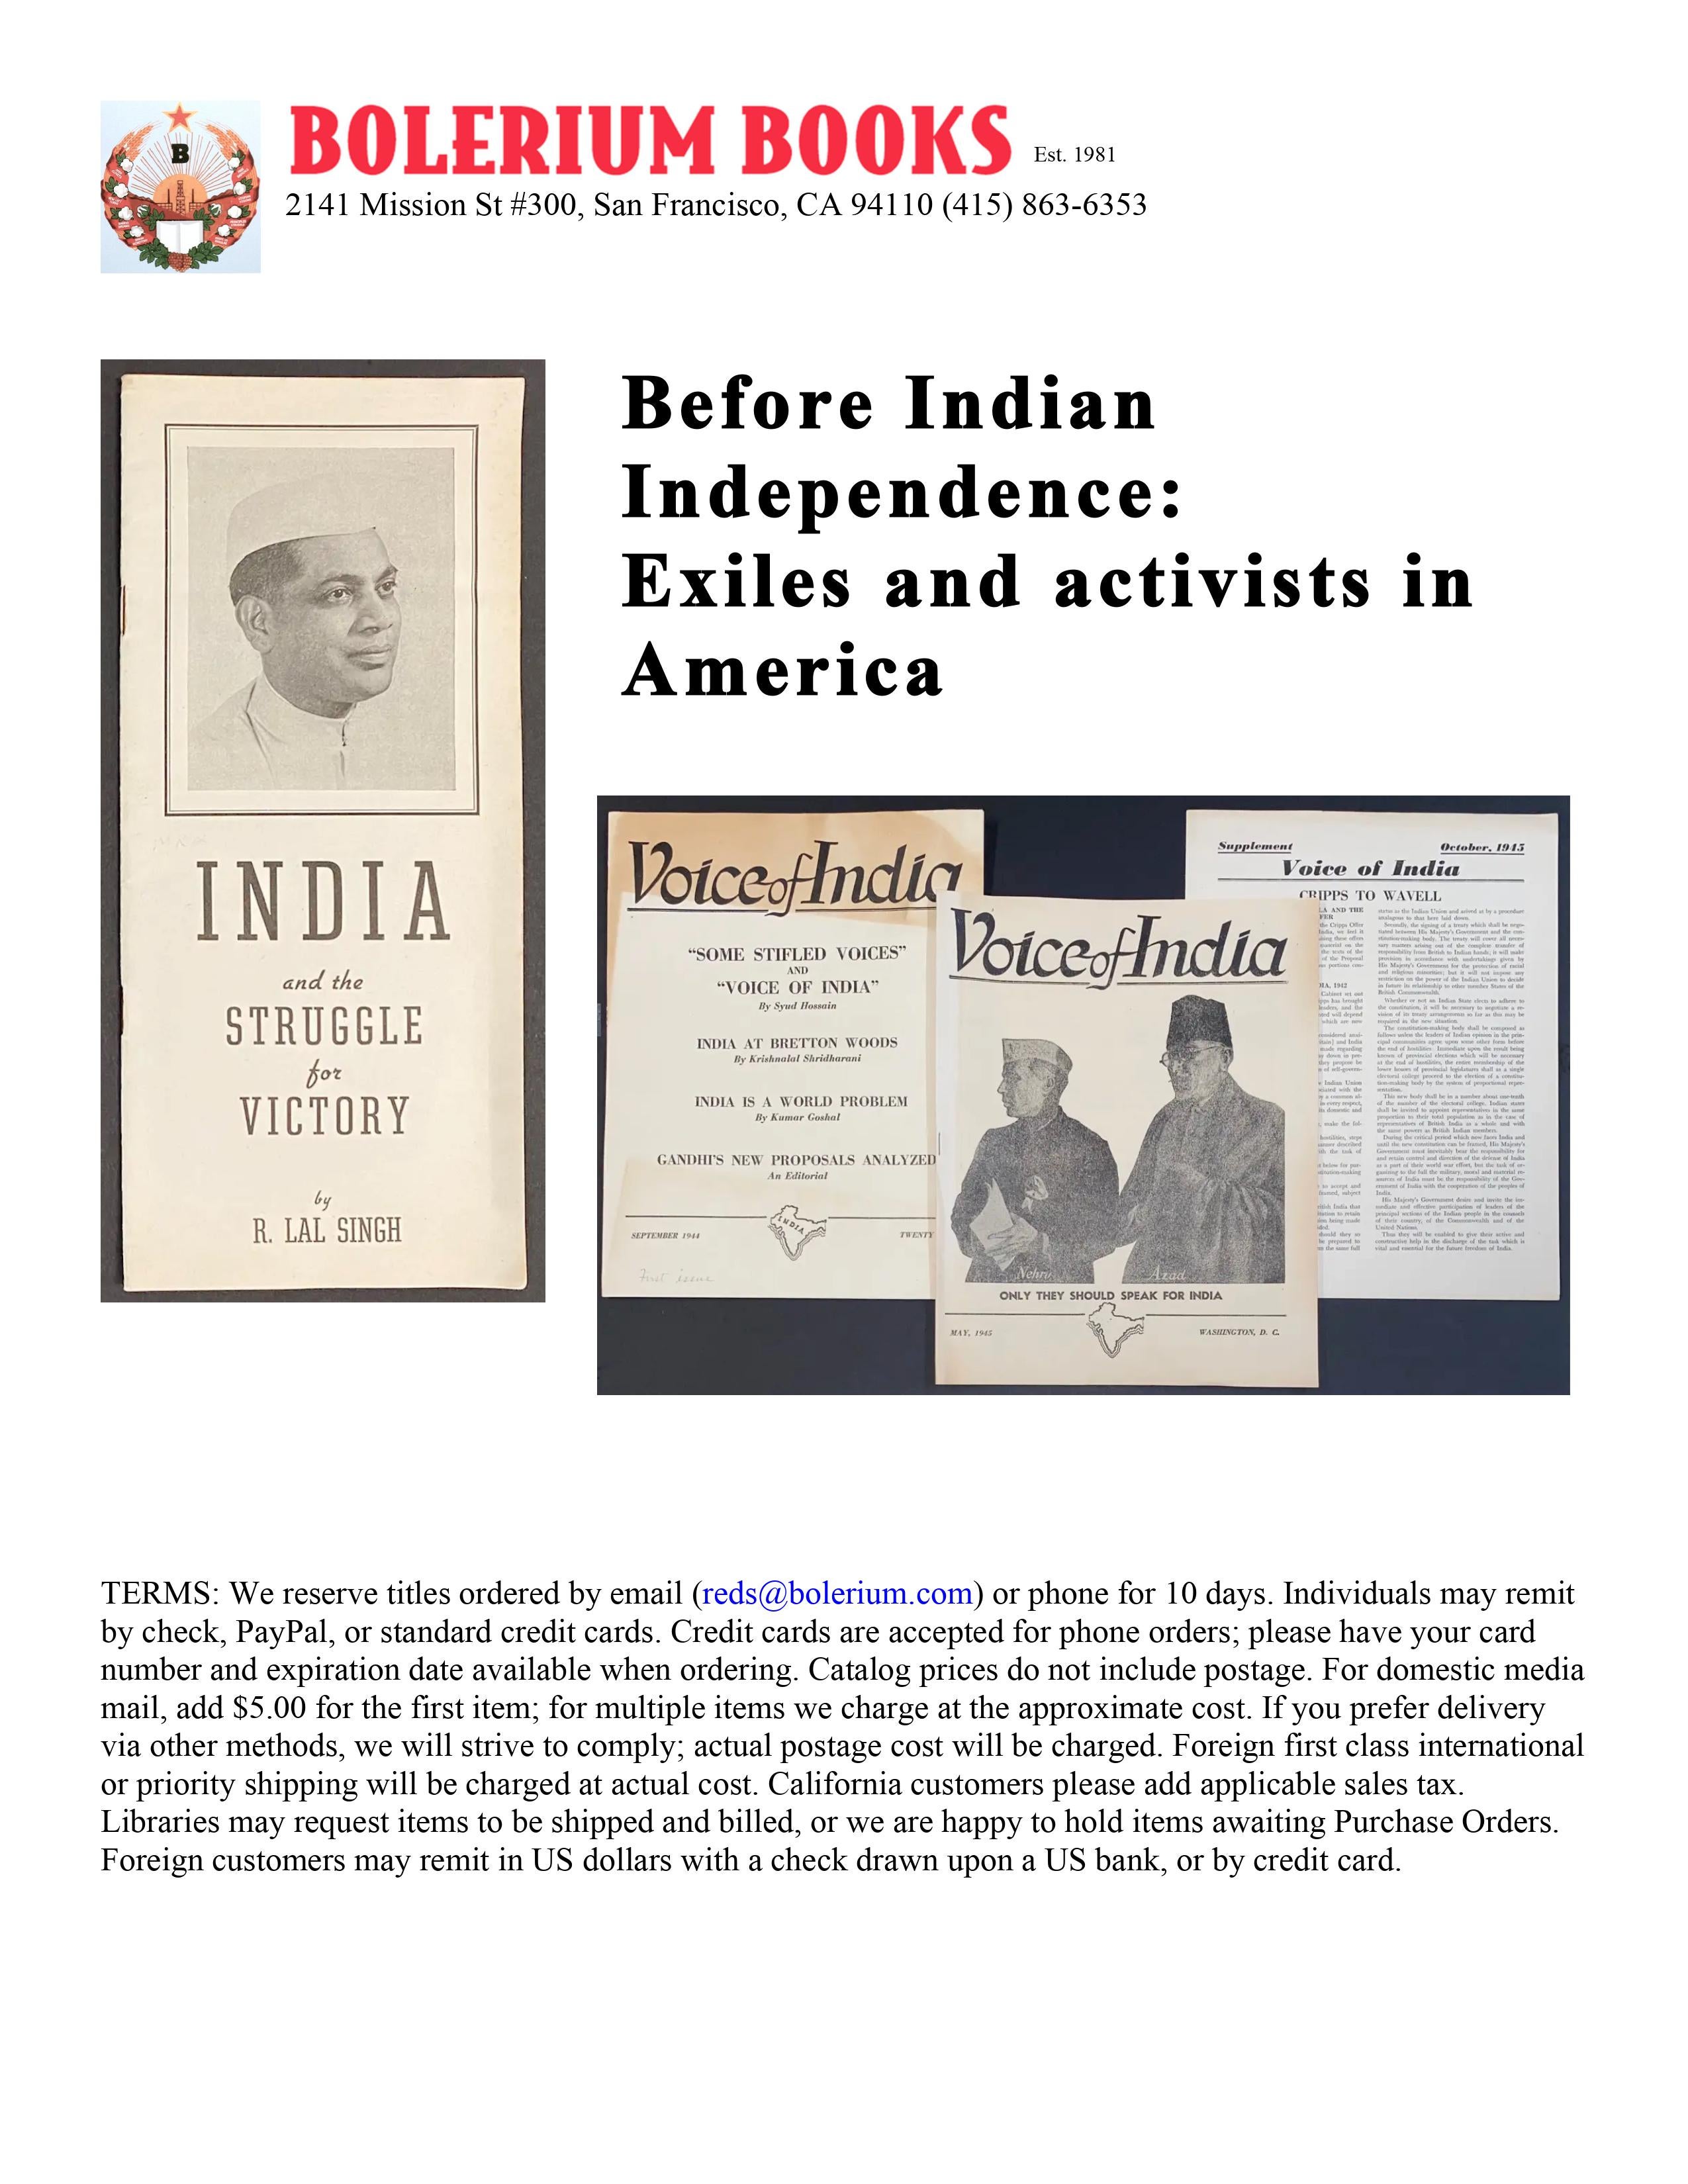 Before Indian Independence: Exiles and activists in America